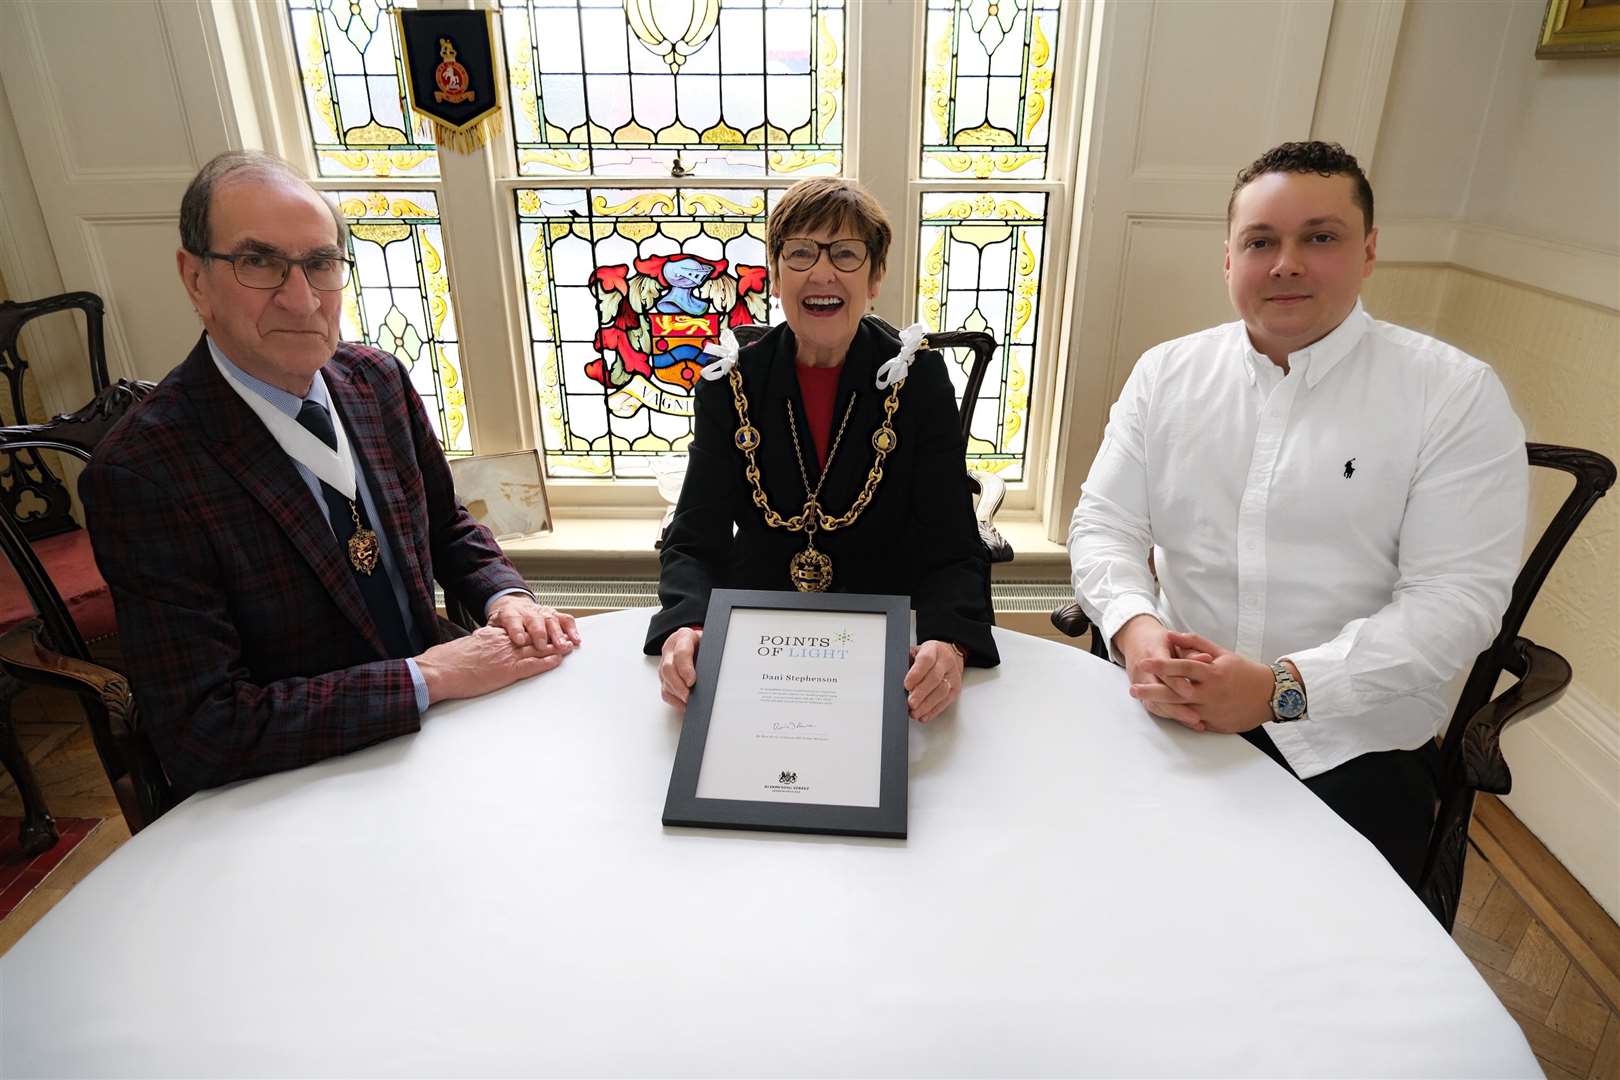 The Mayor’s Consort, Mr Peter Gooch, The Mayor of Maidstone, Cllr Fay Gooch and Dani StephensonPhotographer, Peter Cooper, Maidstone Borough Council